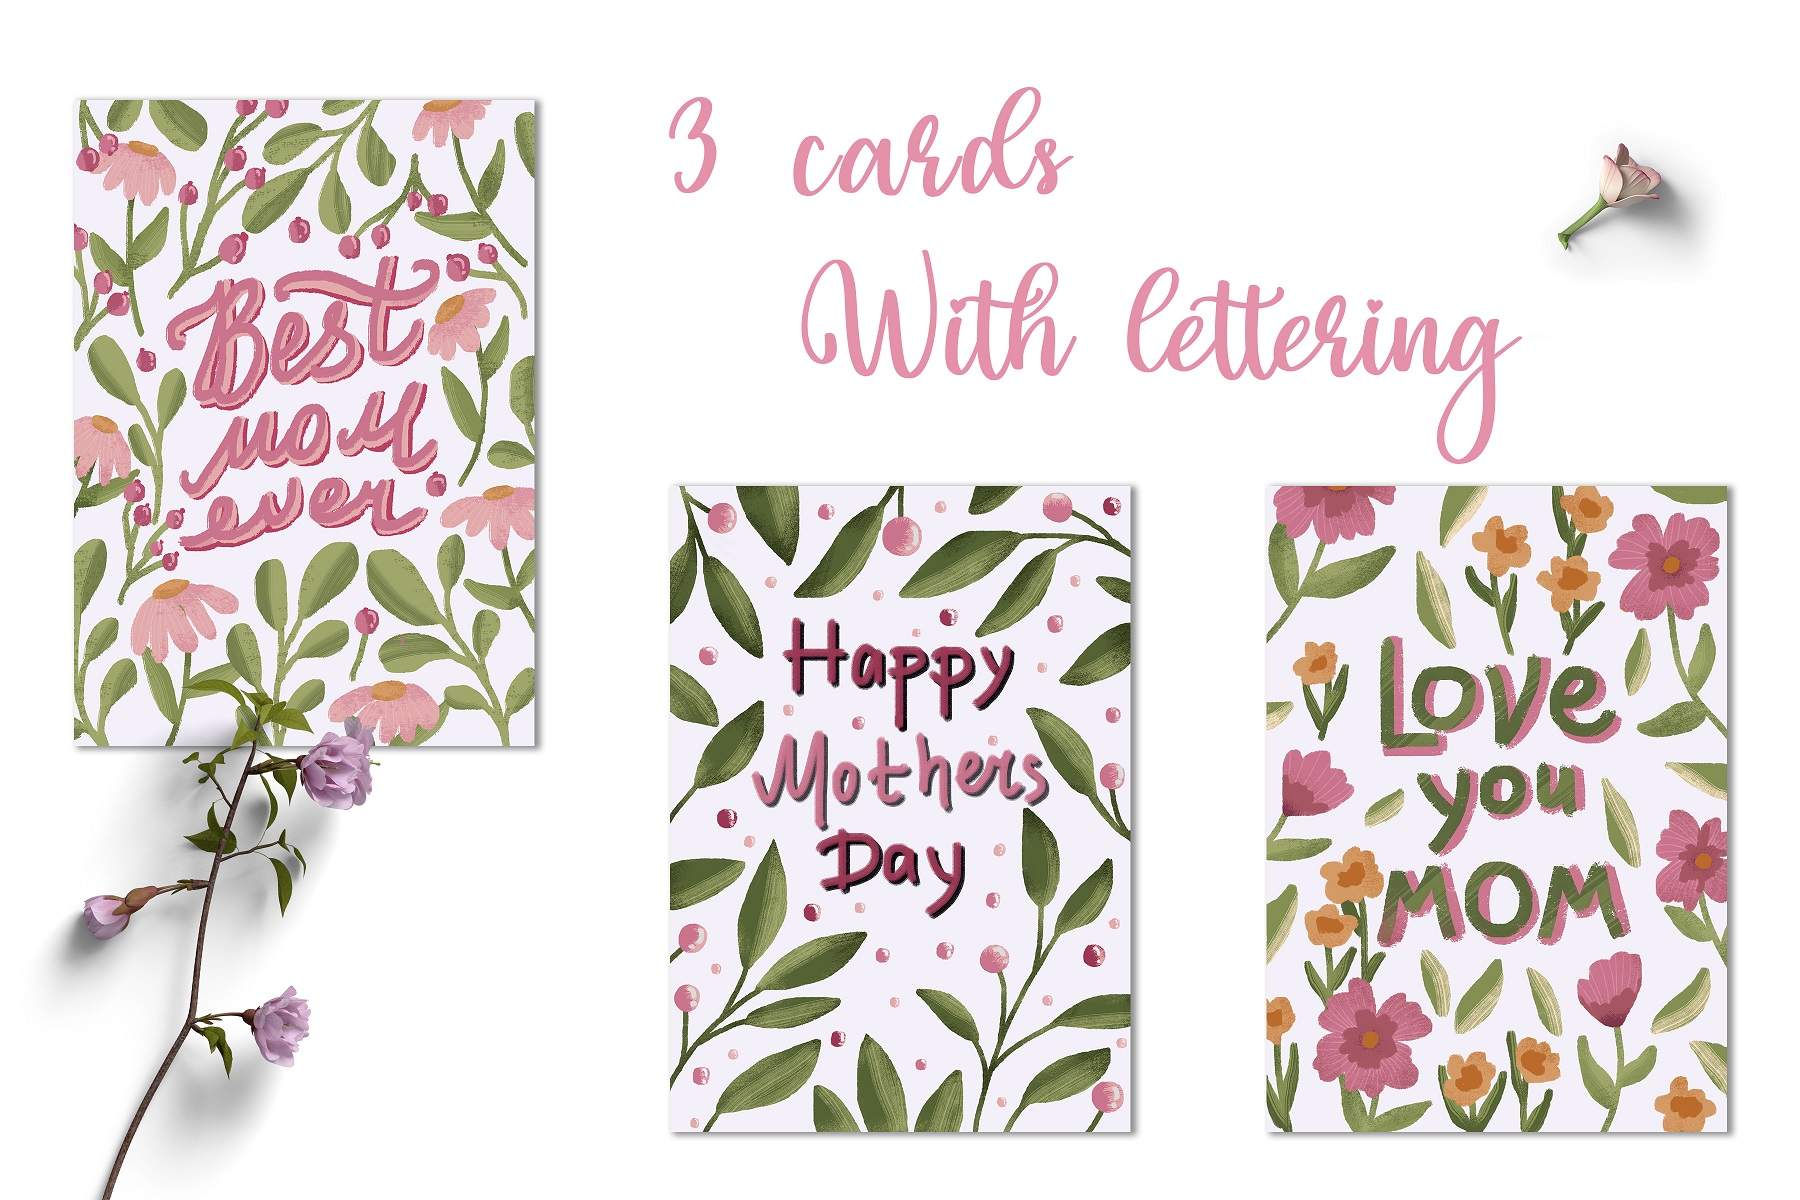 Three cards with lettering and flowers on them.